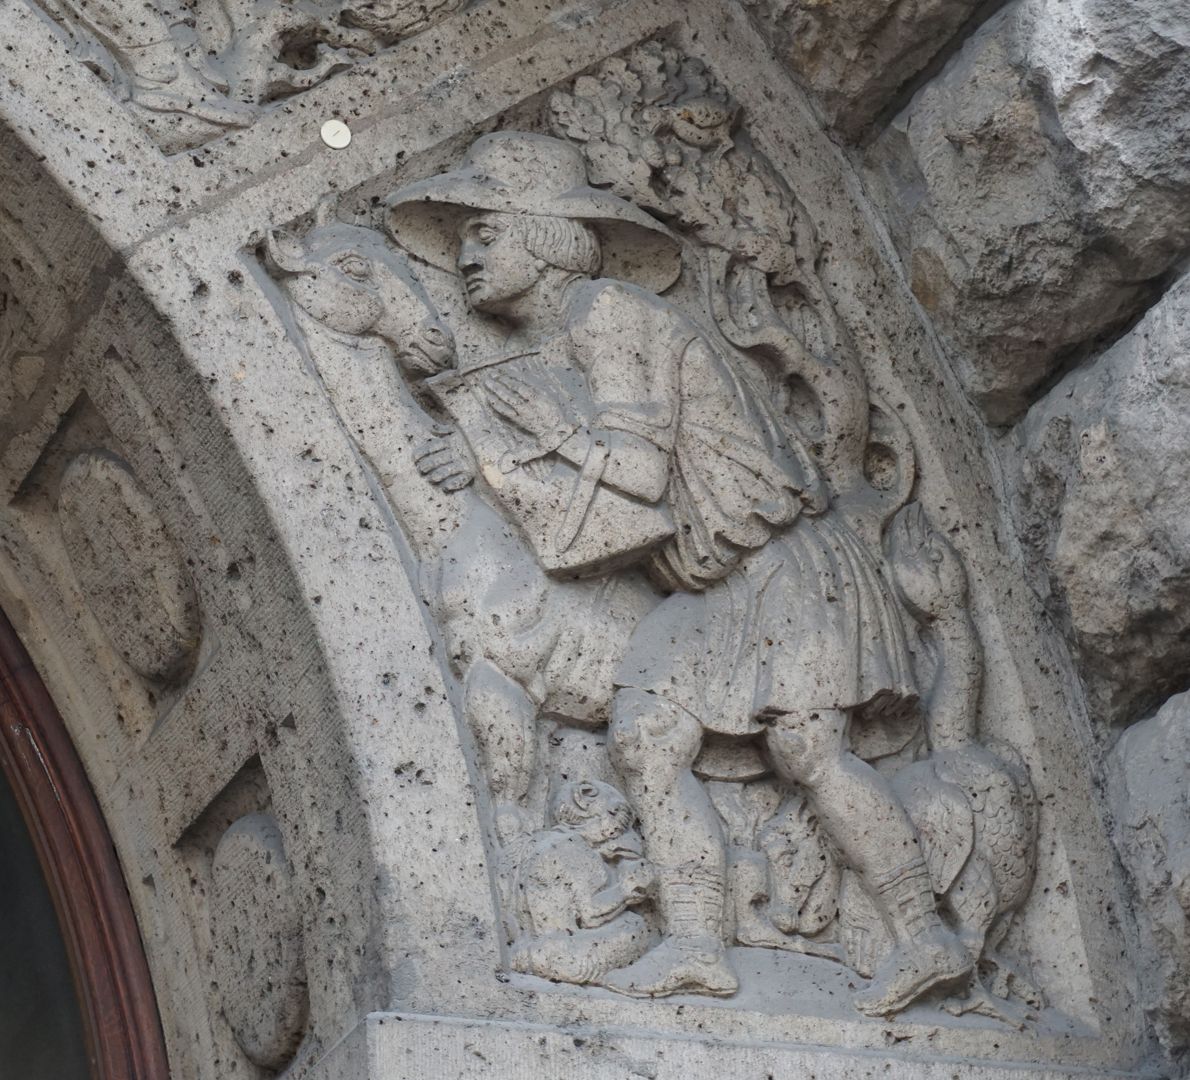 facade decoration at Melanchthon-Gymnasium "Music", a male figure carrying a lyre and surrounded by animals, which turn towards him